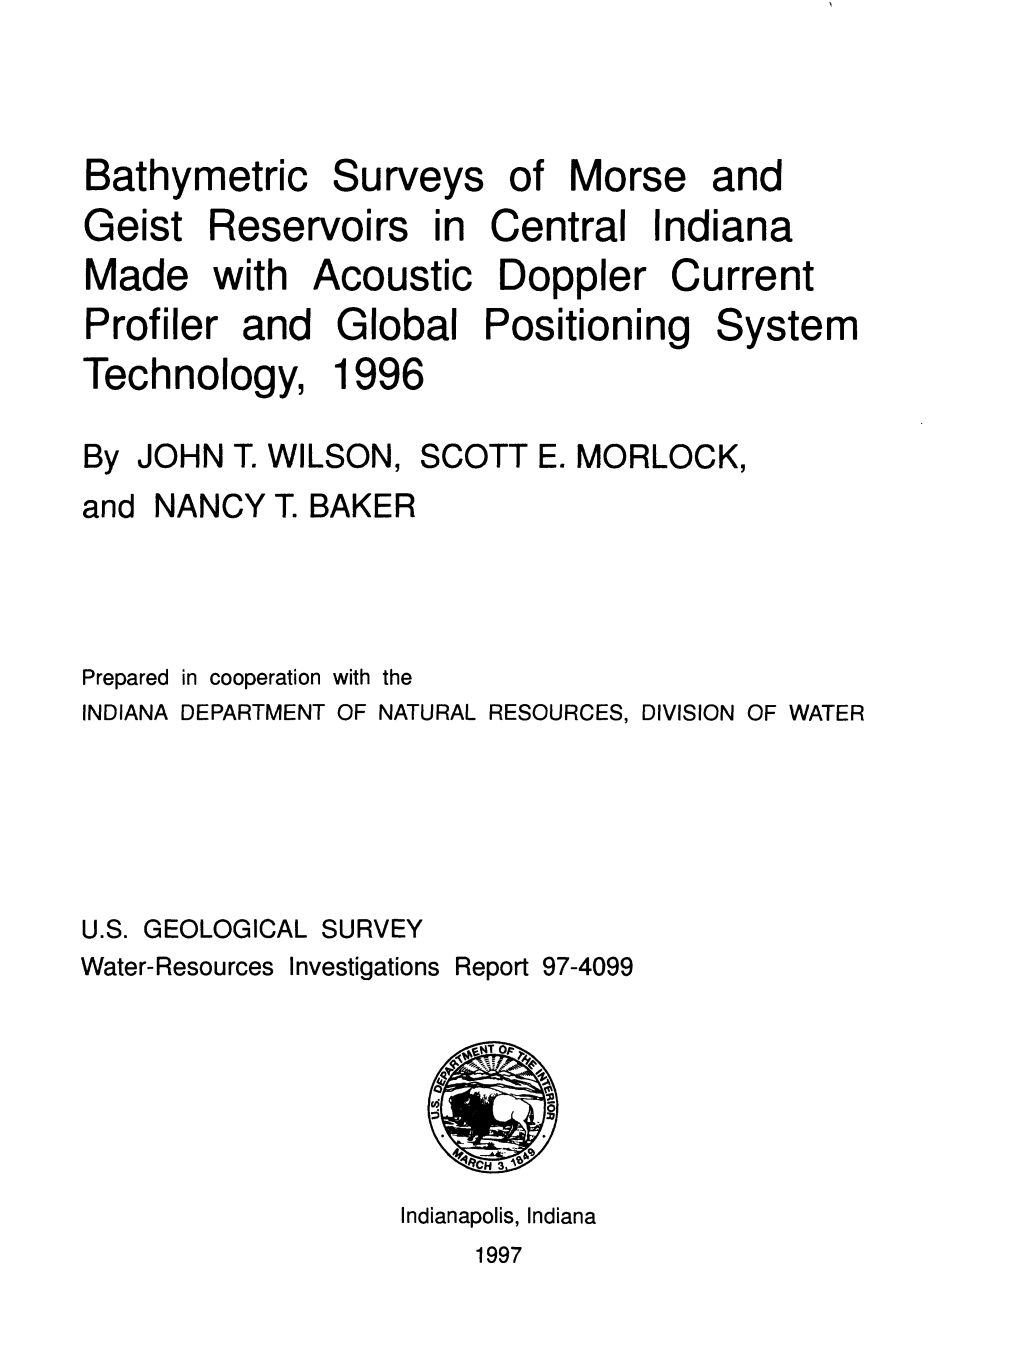 Bathymetric Surveys of Morse and Geist Reservoirs in Central Indiana Made with Acoustic Doppler Current Profiler and Global Positioning System Technology, 1996